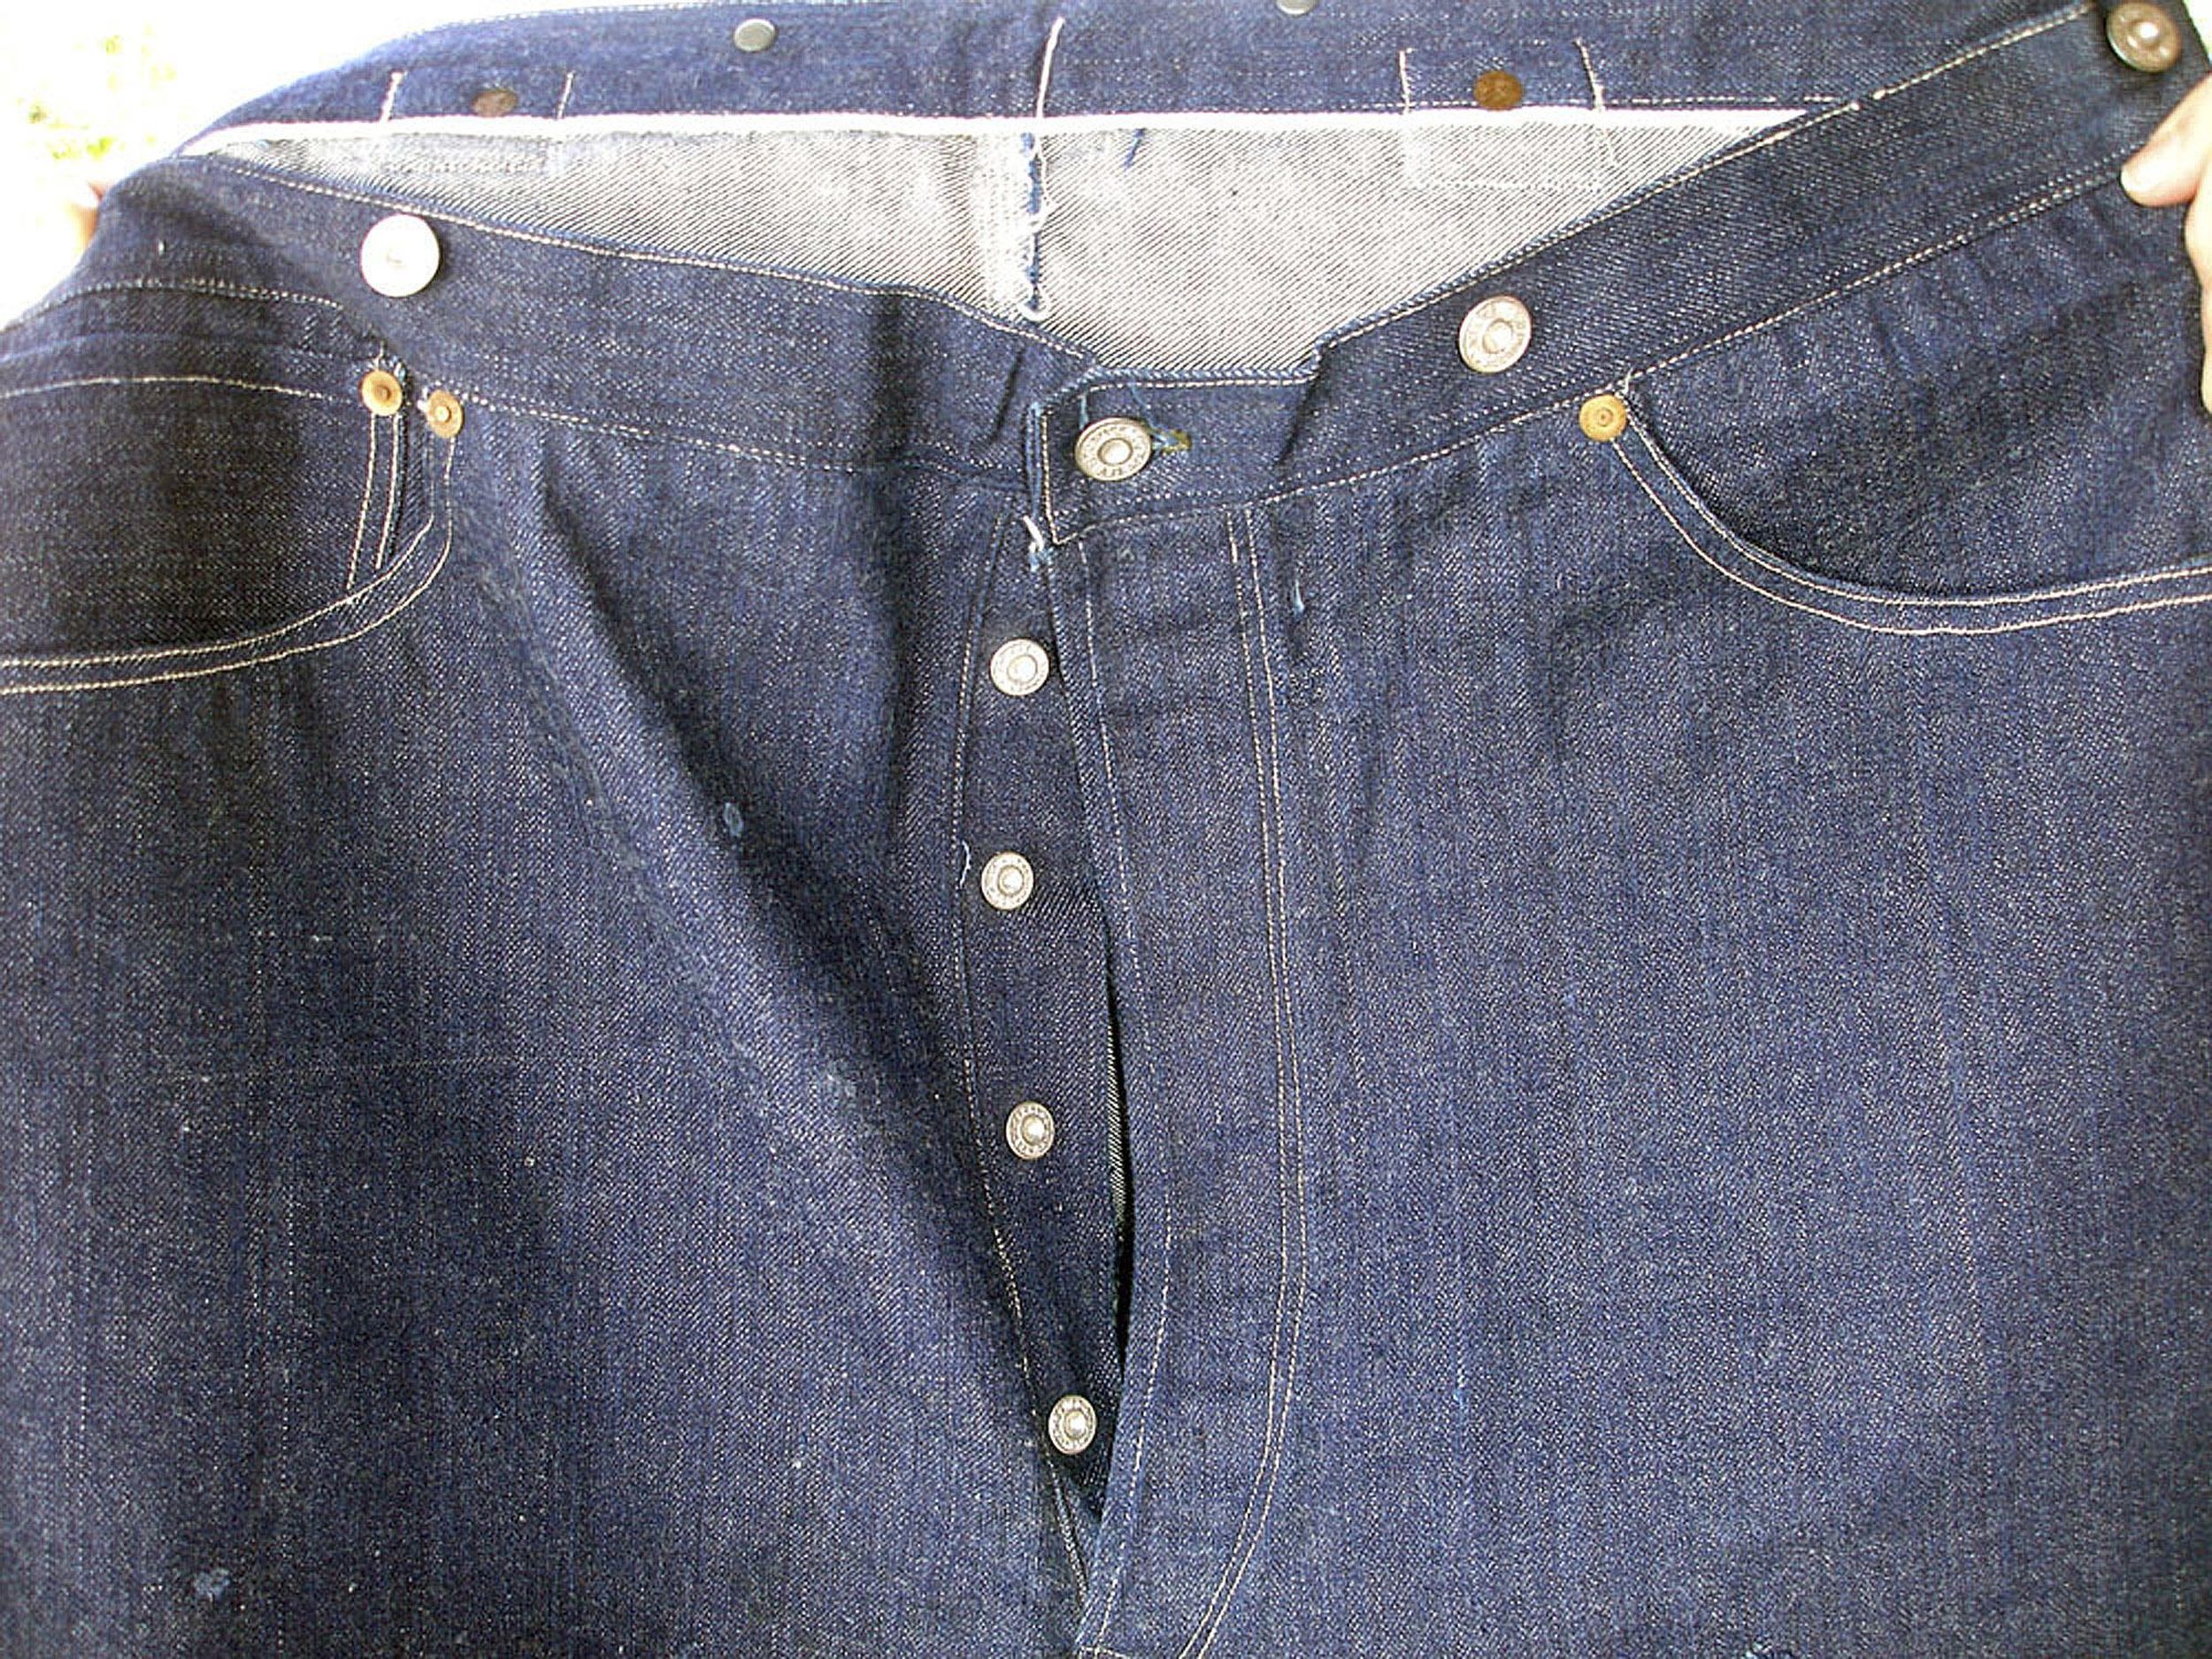 Vintage denim: 125-year-old Levis sell for nearly $100K | The Spokesman ...